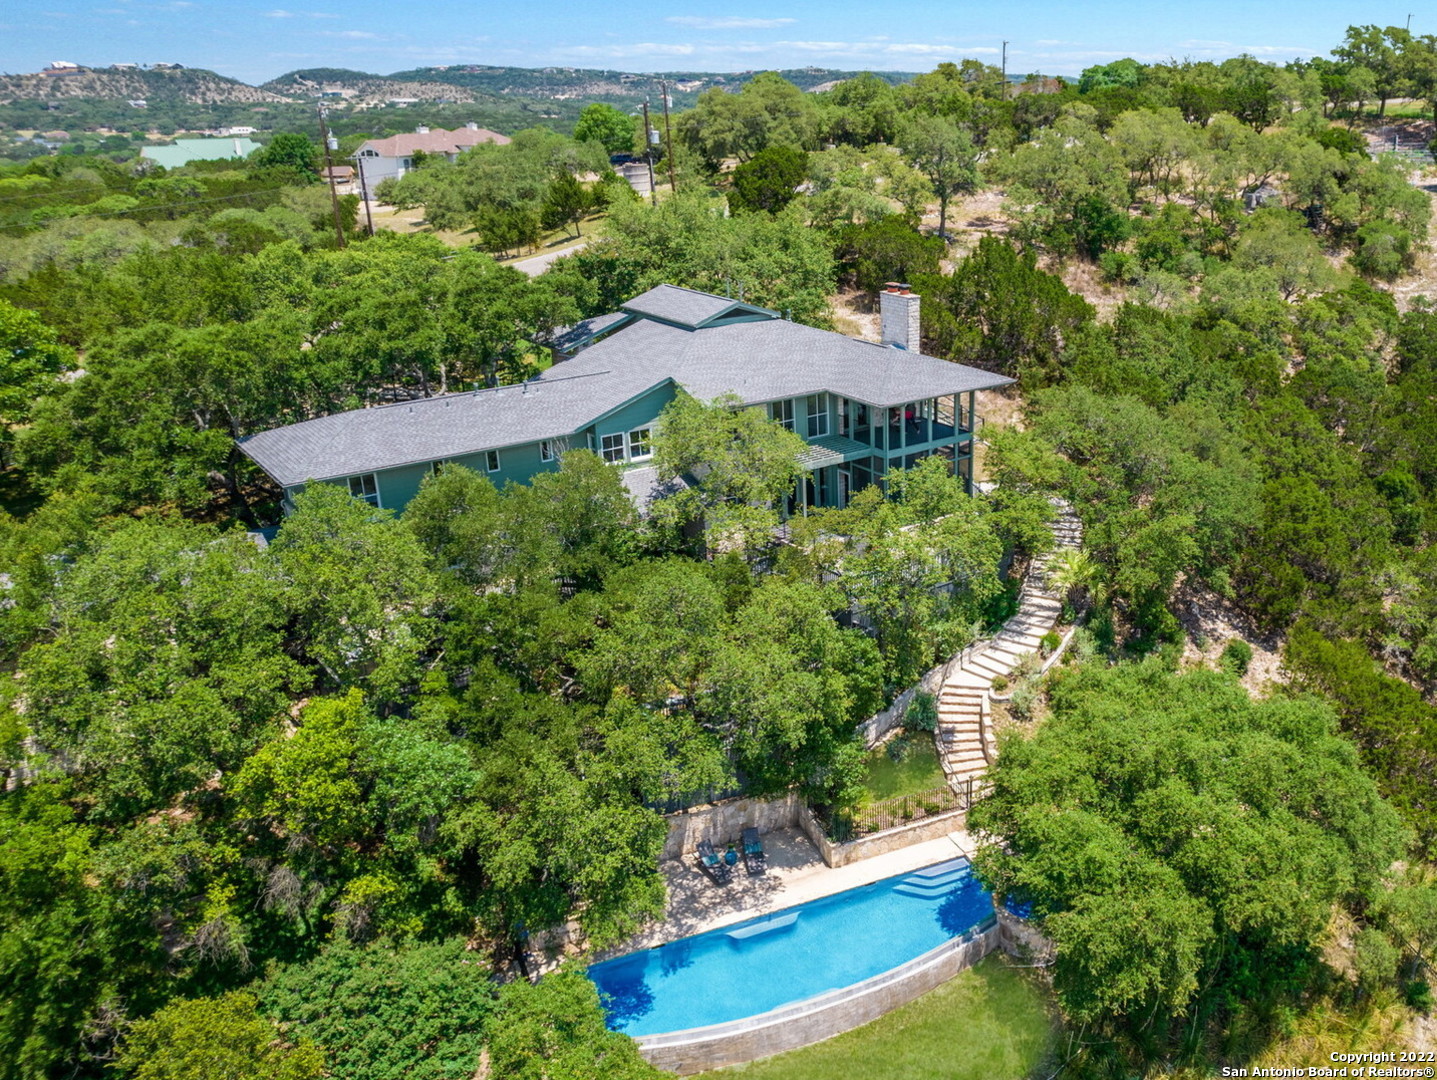 Contemporary Hill Country Masterpiece! This custom home designed by Award Winning Austin Archcitect, Tim Cuppett, captivates with an understated, sexy sophistication. The refined, timeless style is well-executed to complement, and not compete against the alluring outdoor elements, overlooking the Cibolo Creek and Canyon. Upon first step into the foyer, the soaring ceiling, brilliant architectural design and gorgeous hardwood maple flooring create an instant WOW factor. And, let's talk about the aesthetic charm of all the wood-framed windows!!! The split-level layout allows for opportunities to enjoy the beautiful hill country from almost every room! The great room includes a full limestone wall & fireplace with space for several conversation areas. The dining room is open to encourage a relaxed & enjoyable ambiance. The sleek galley kitchen boasts long granite counters, 2 sinks, stainless appliances including a Thermador 6-burner gas range with convection oven. The master suite features a gas fireplace, full bathroom, walk-in closet & private balcony. The office possesses a lofty vibe, complete with built-ins, a corner window reading nook & is conveniently located near the master suite. The secondary bedrooms, bathrooms & living room can be found tucked away on other levels. The multi-tiered, hillside decks provide plenty of spots for coffee at sunrise, yoga, dinners al fresco & shaded evenings with drinks & entertaining. I dare you to find a spot that doesn't provide you with incredible, breath-taking views of the canyon! This gated property is near the end of a cul-de-sac, feeling hidden & private. No city taxes! Conveniently located between New Braunfels, San Antonio and Boerne.